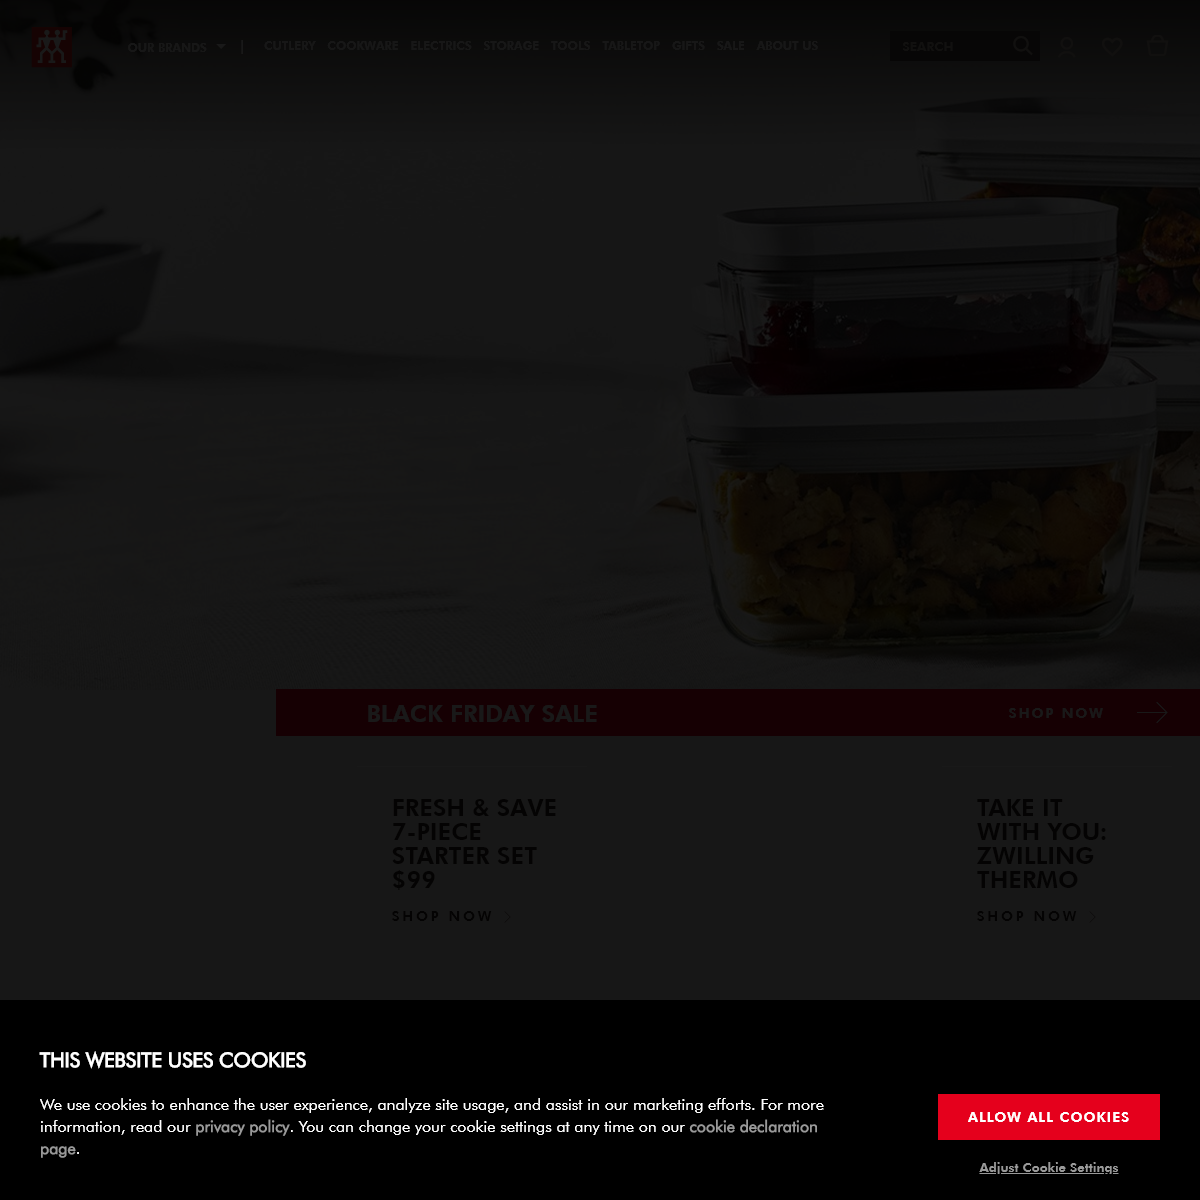 A complete backup of zwilling.com